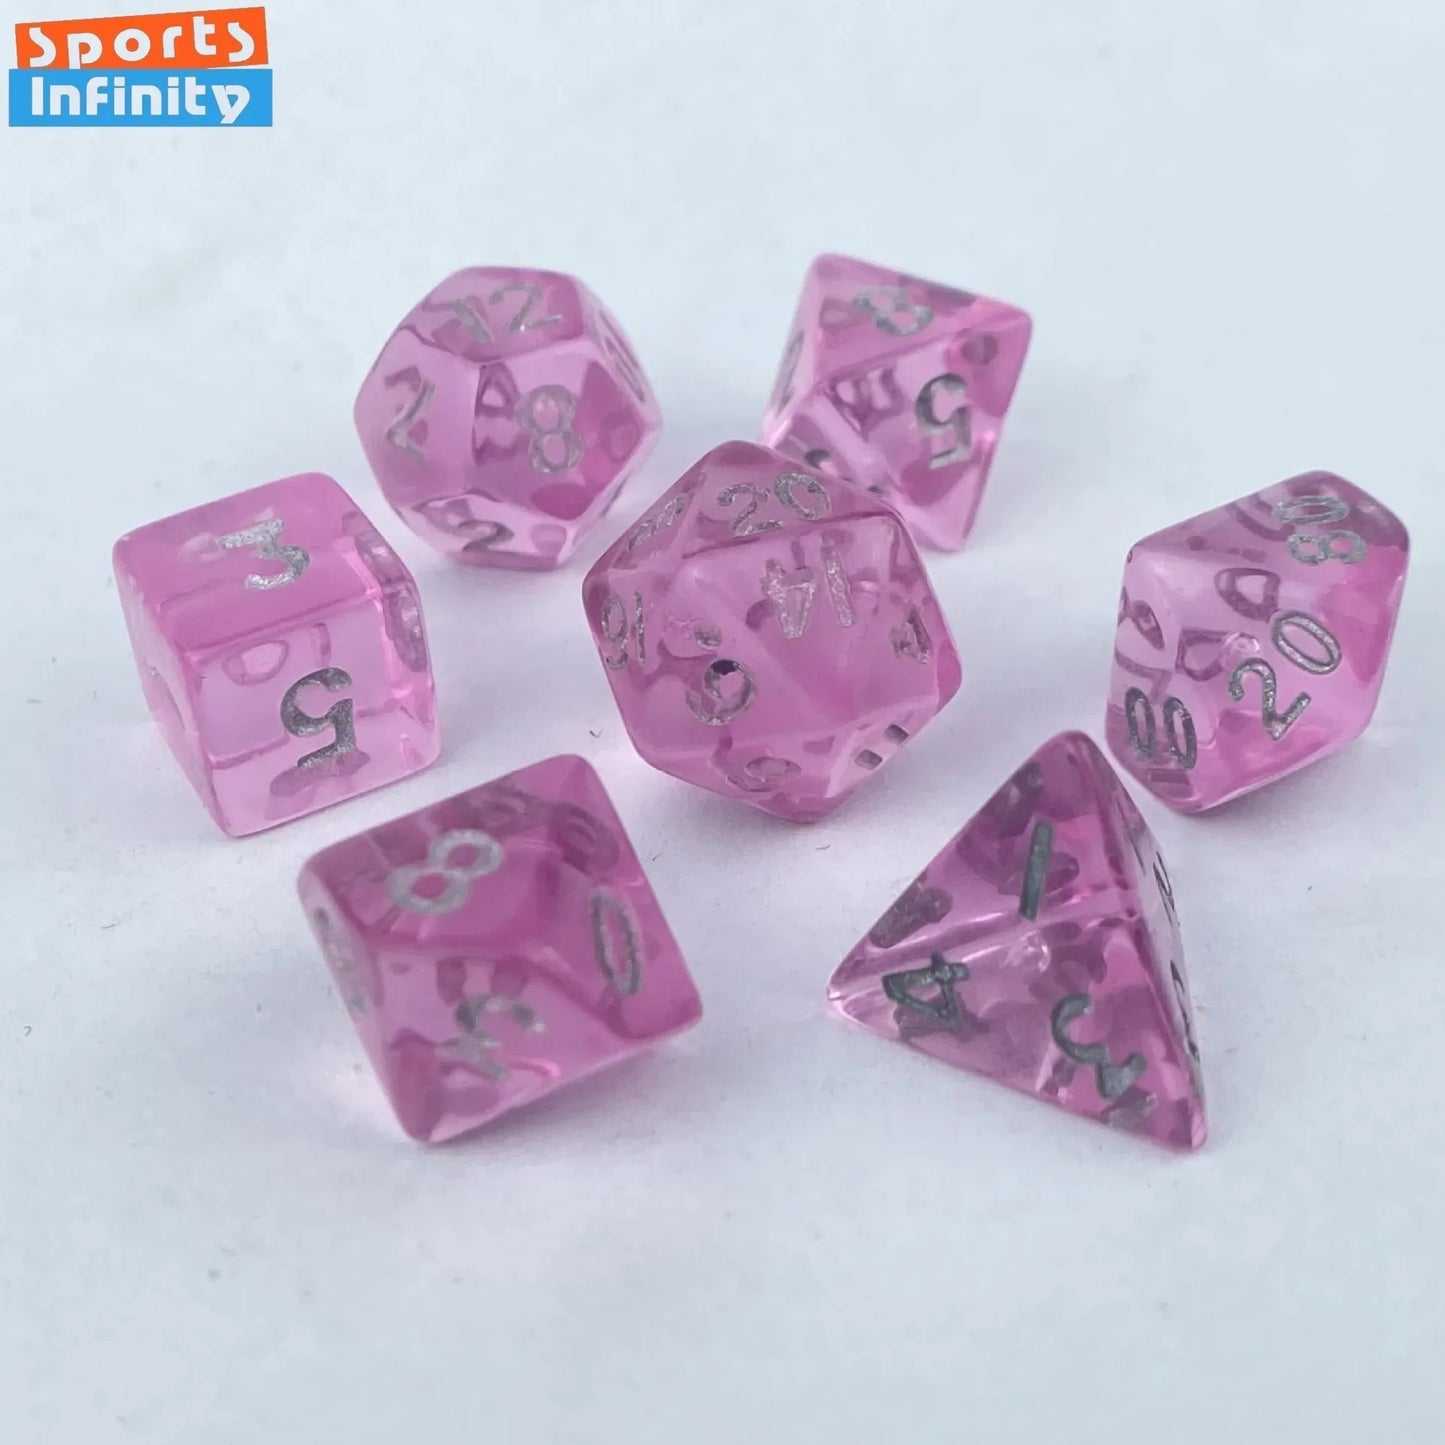 7pcs of Mini Acrylic Dice Set Candy Colored Dice Running Group Board Game Dice D20 D12 D10 D8 D6 D4 DND and COC Polyhedral